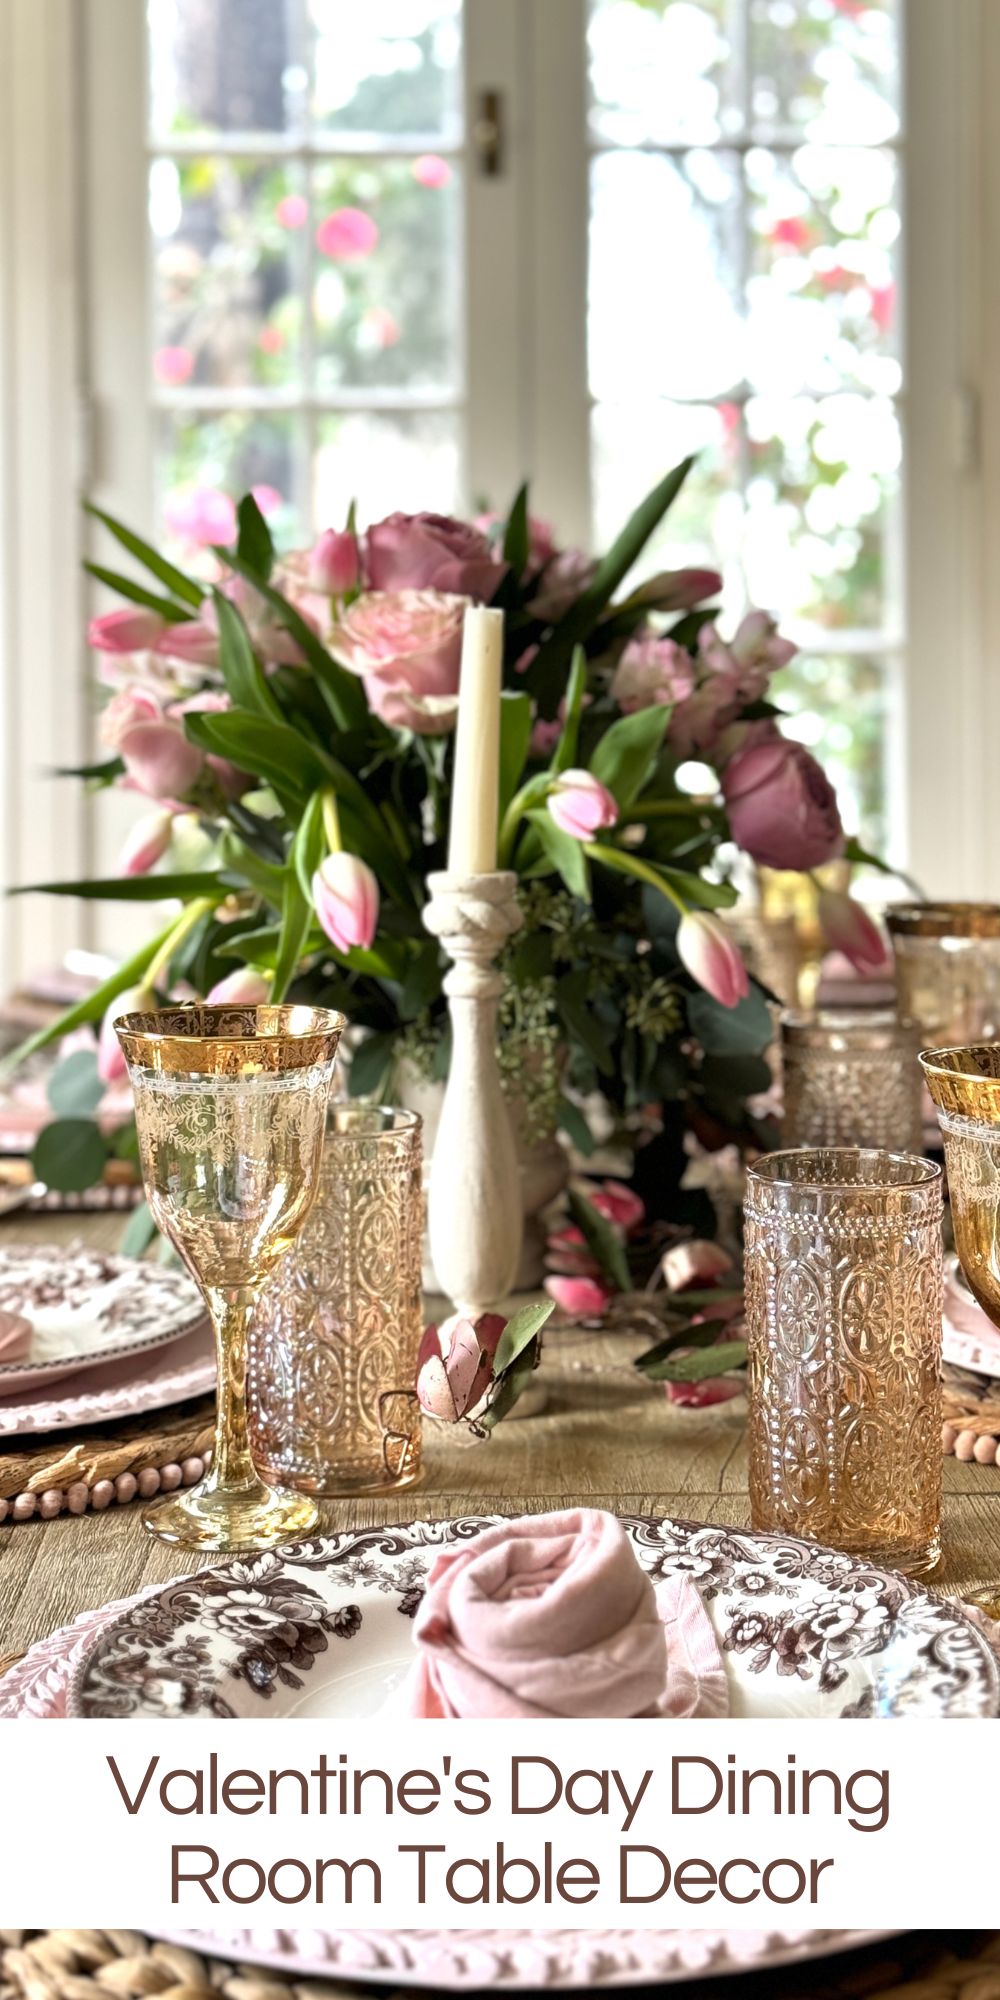 I love setting tables and my favorites are the dining room table decor I have created for Valentine's Day! Here is a beautiful neutral table.